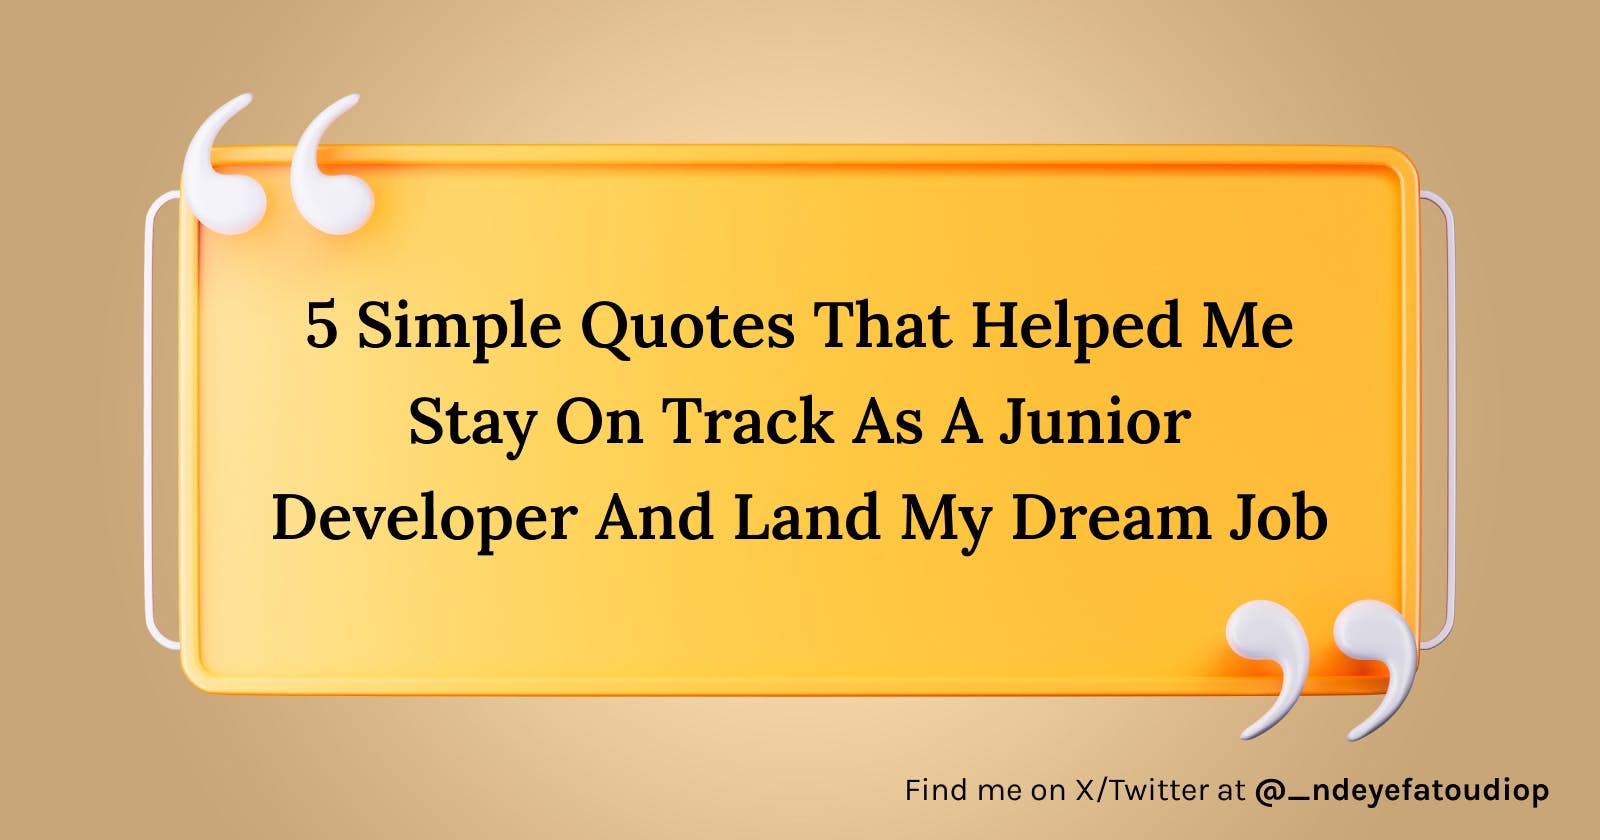 5 Simple Quotes That Helped Me Stay On Track As A Junior Developer And Land My Dream Job